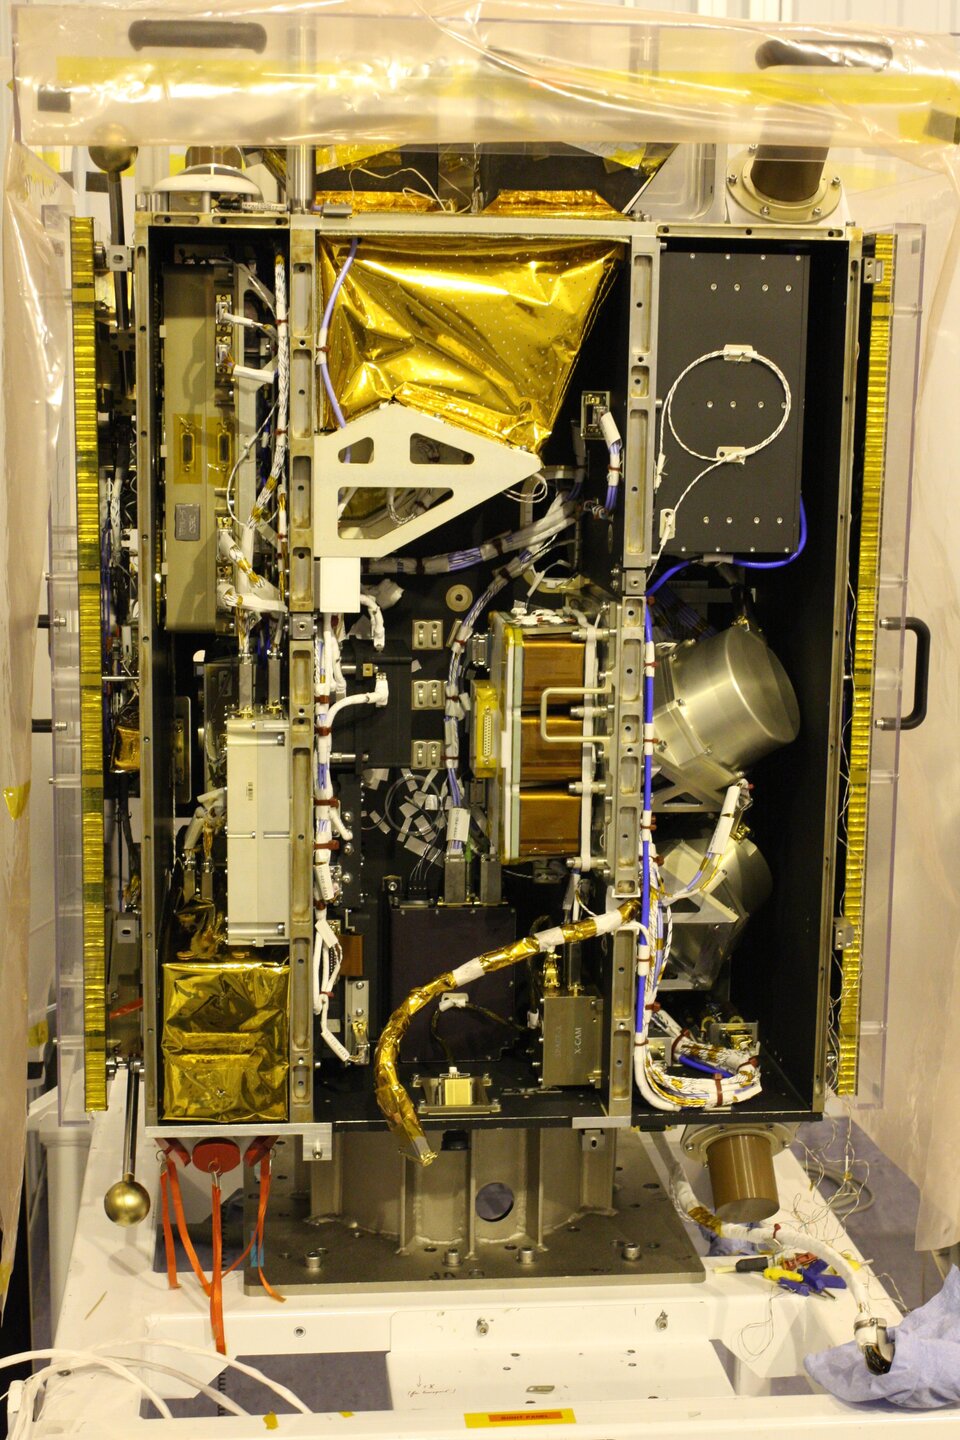 Inside view of spacecraft with battery mounted, prior to closure